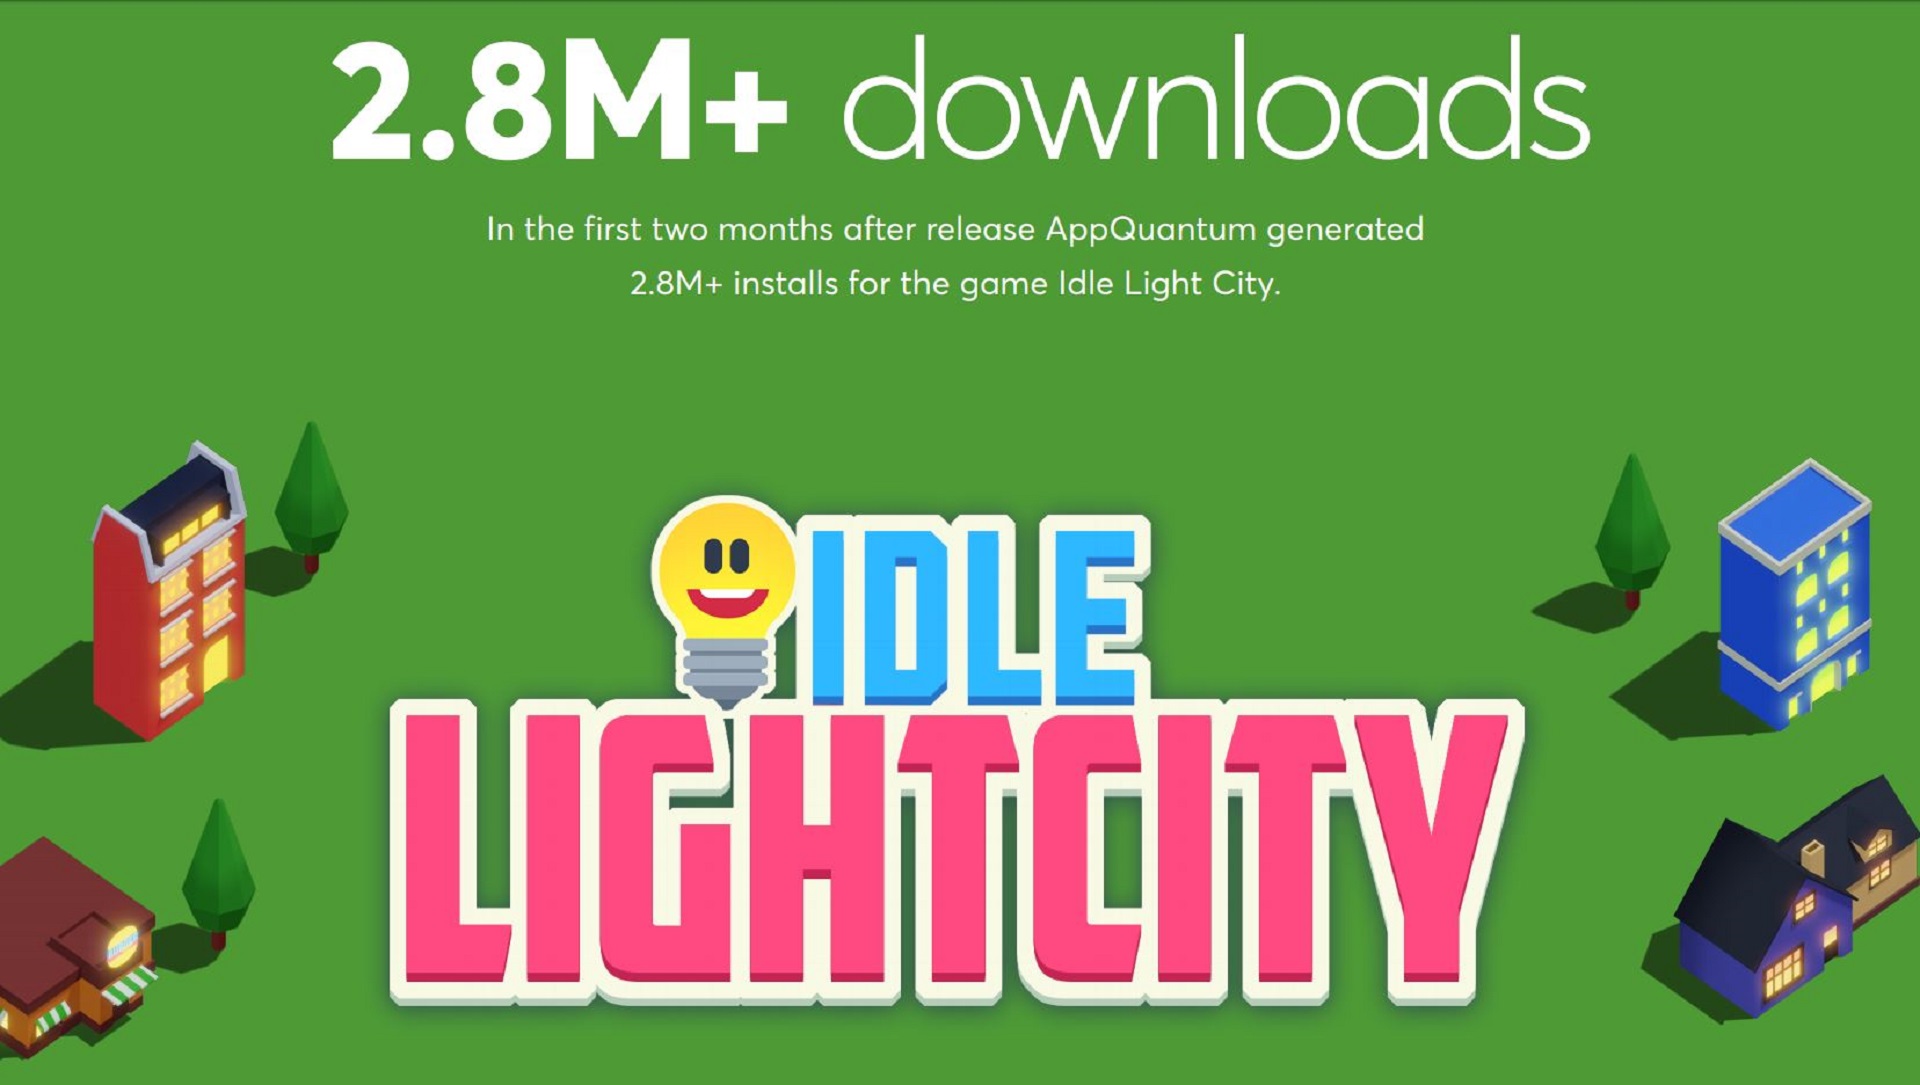 Idle Light City Has Reached 2.8M+ Downloads